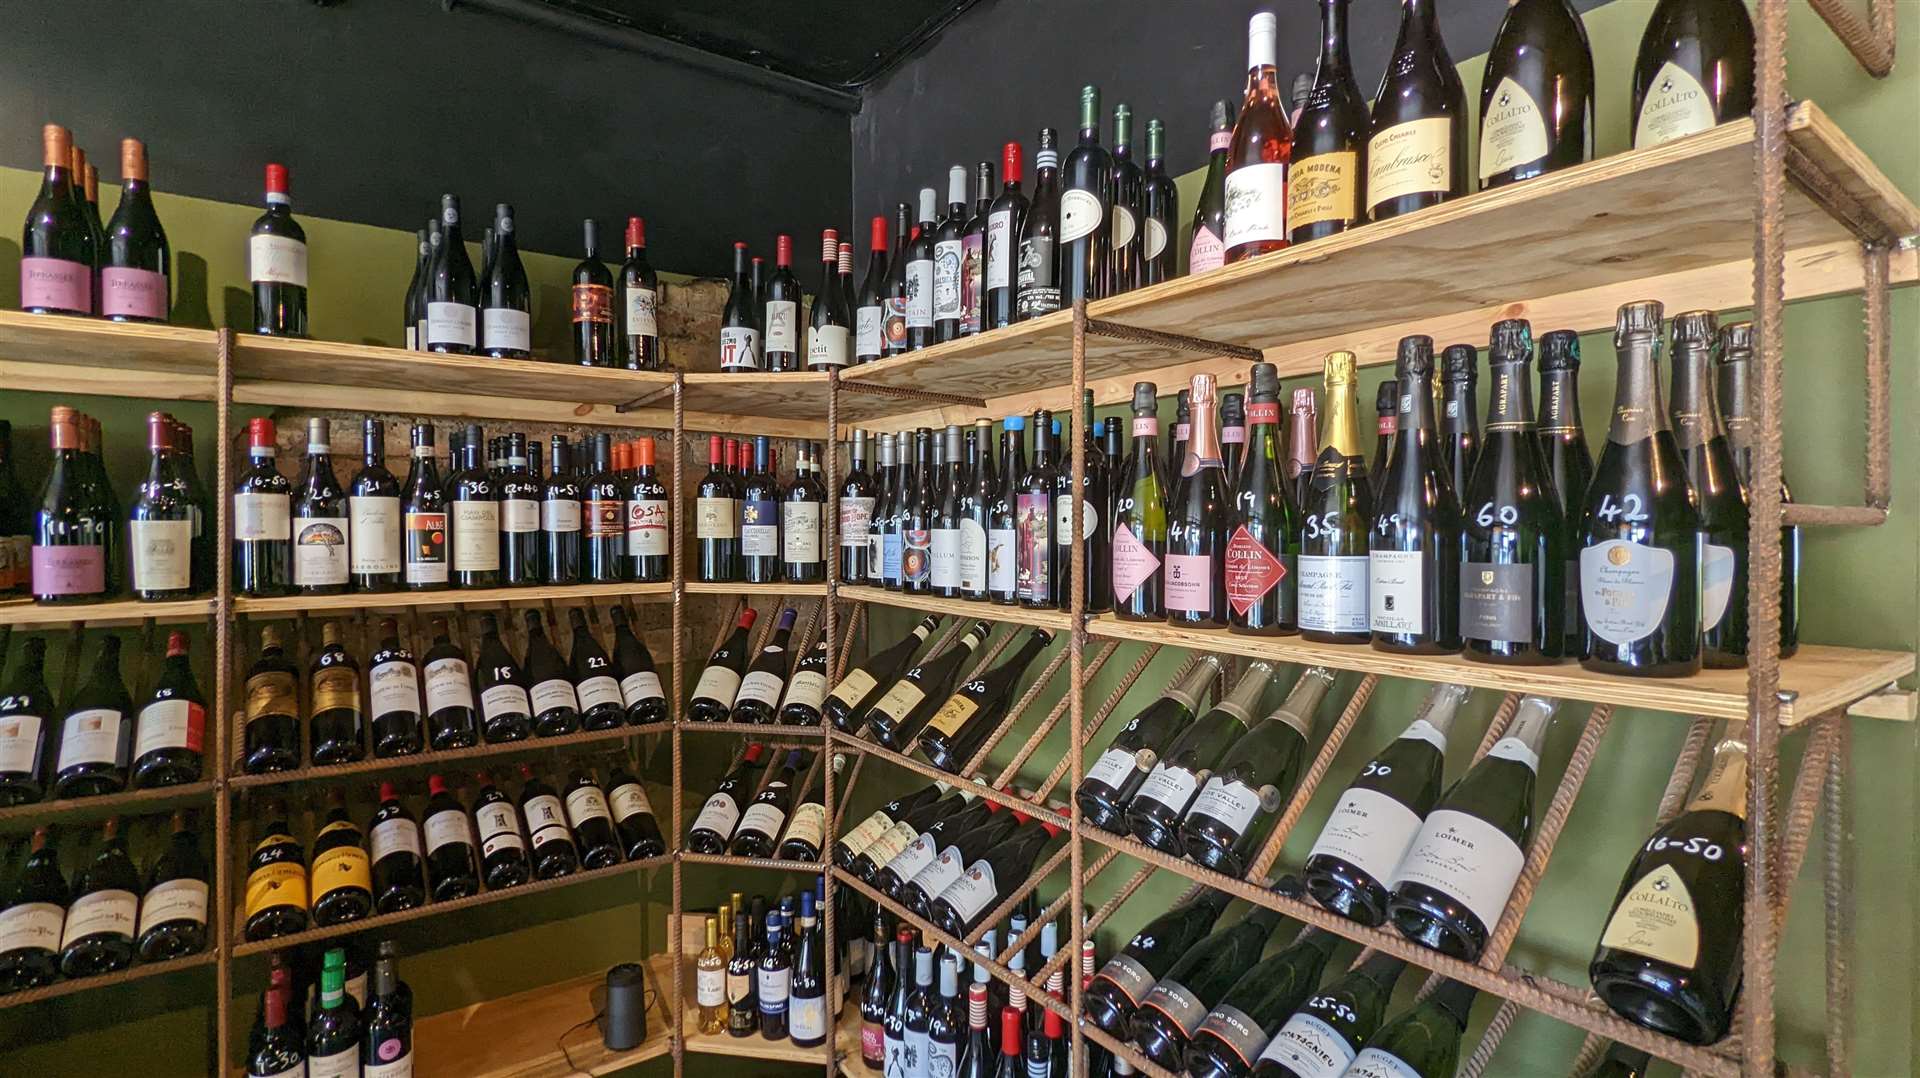 John Dory is a new independent wine shop and tasting room in Sandgate